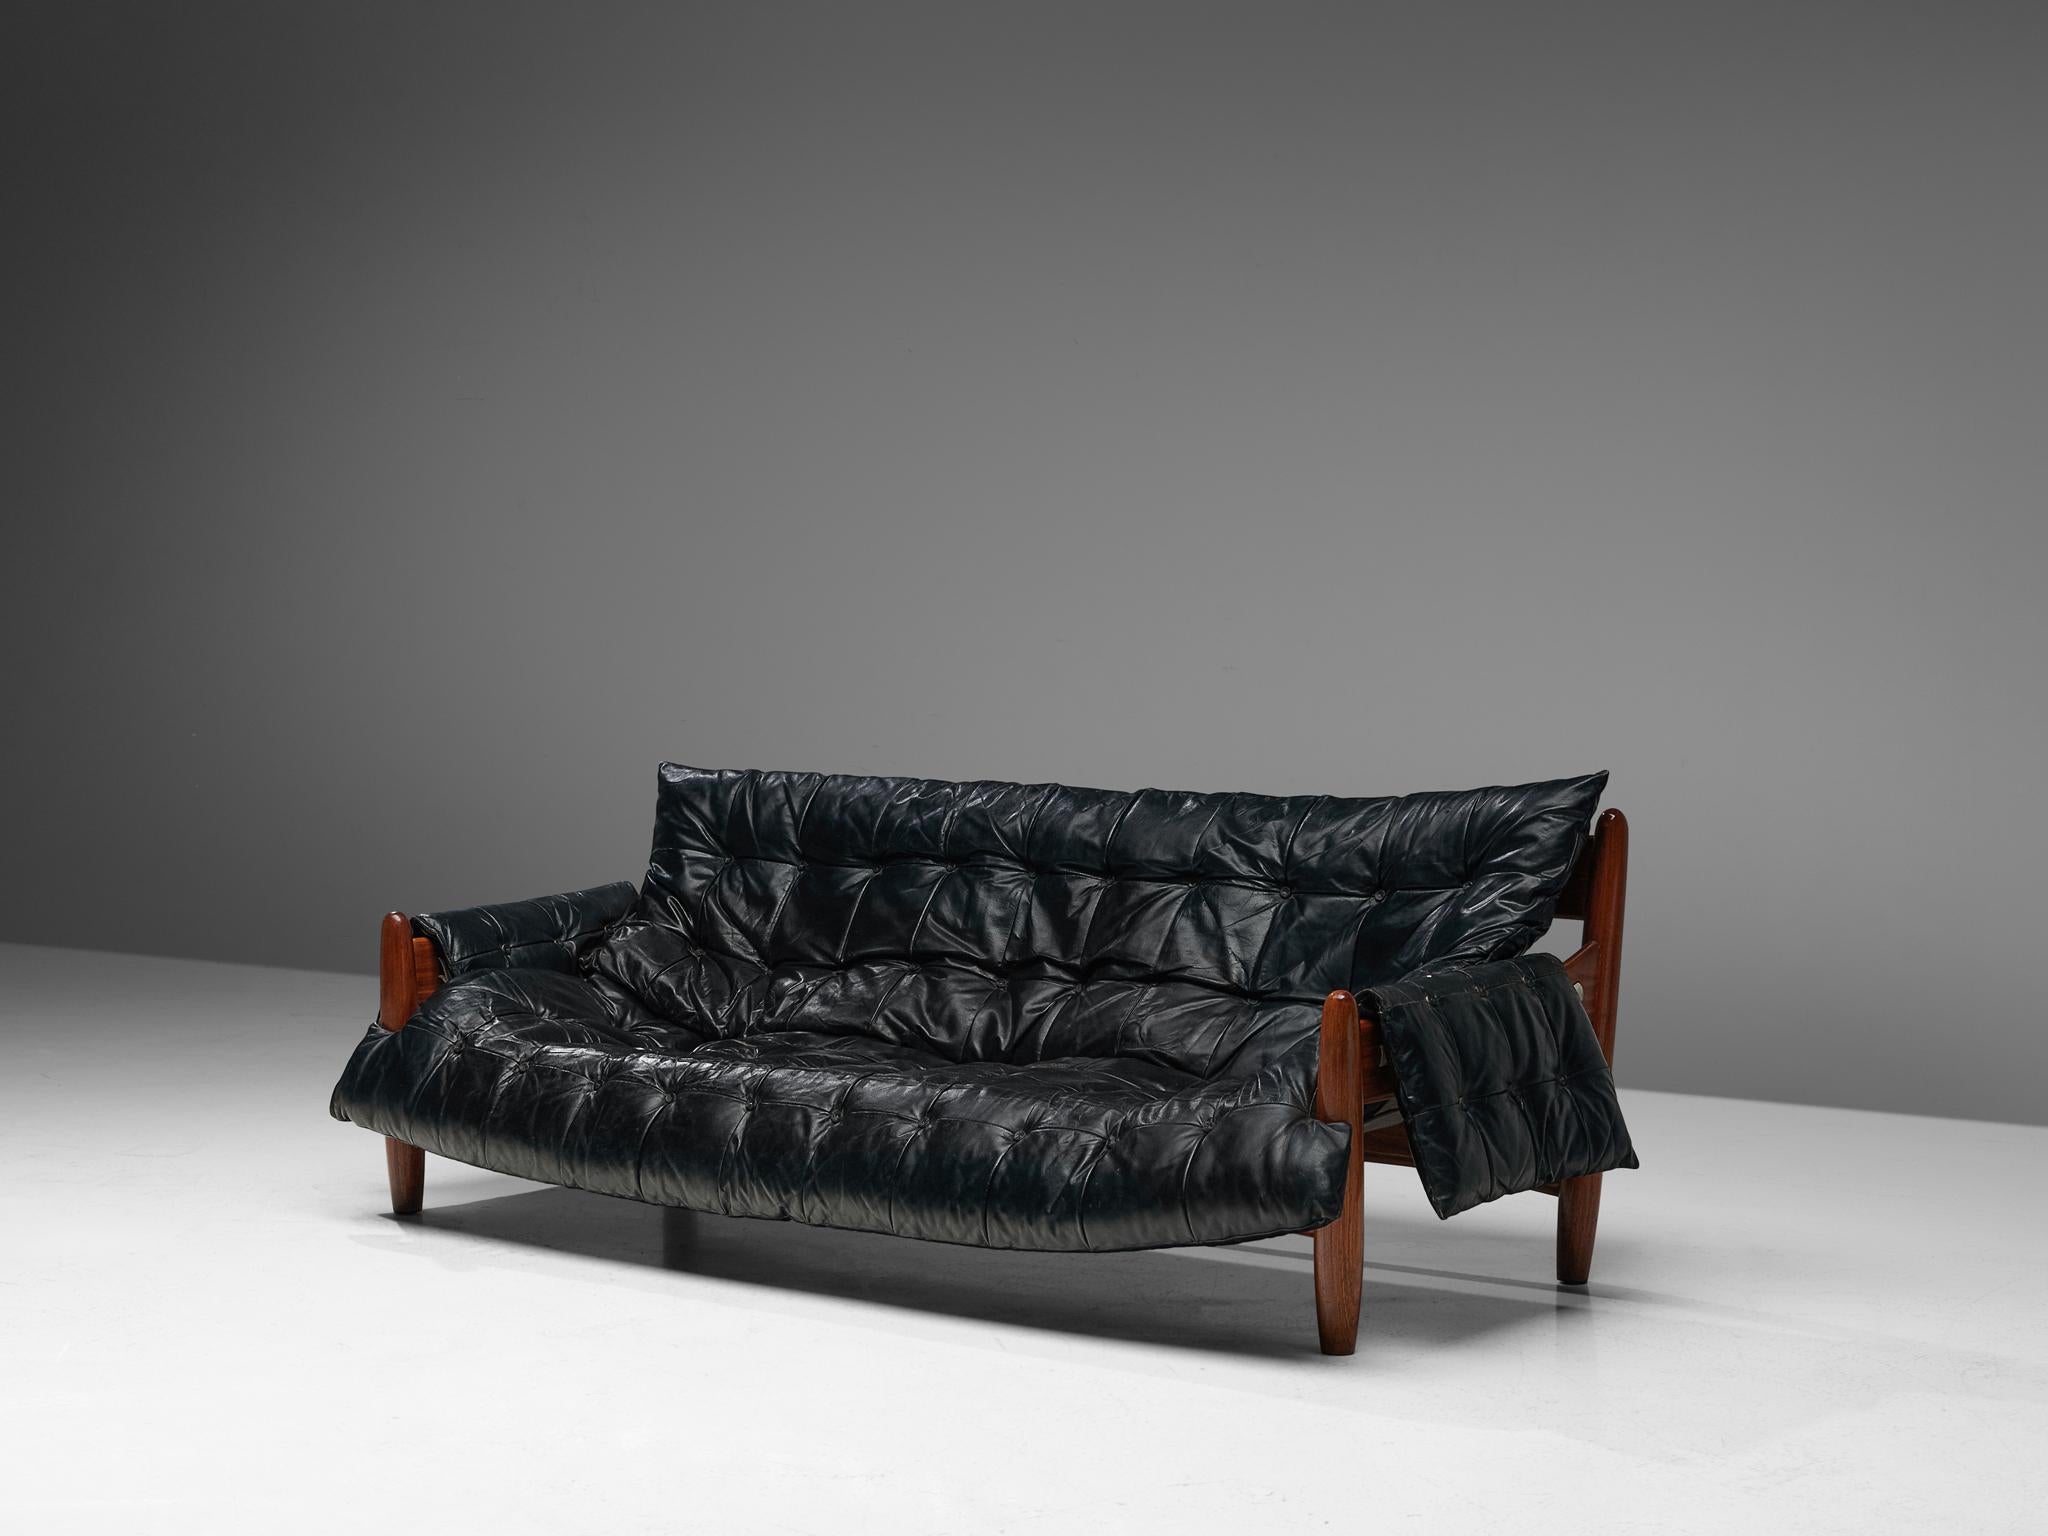 Sergio Rodrigues, 'Sheriff' sofa, faux leather, imbuia wood, Brazil, 1960s

Comfortable and large sofa by Brazilian designer Sergio Rodriques. This sofa breaths the characteristics of Brazilian modern furniture design. Made of traditional materials